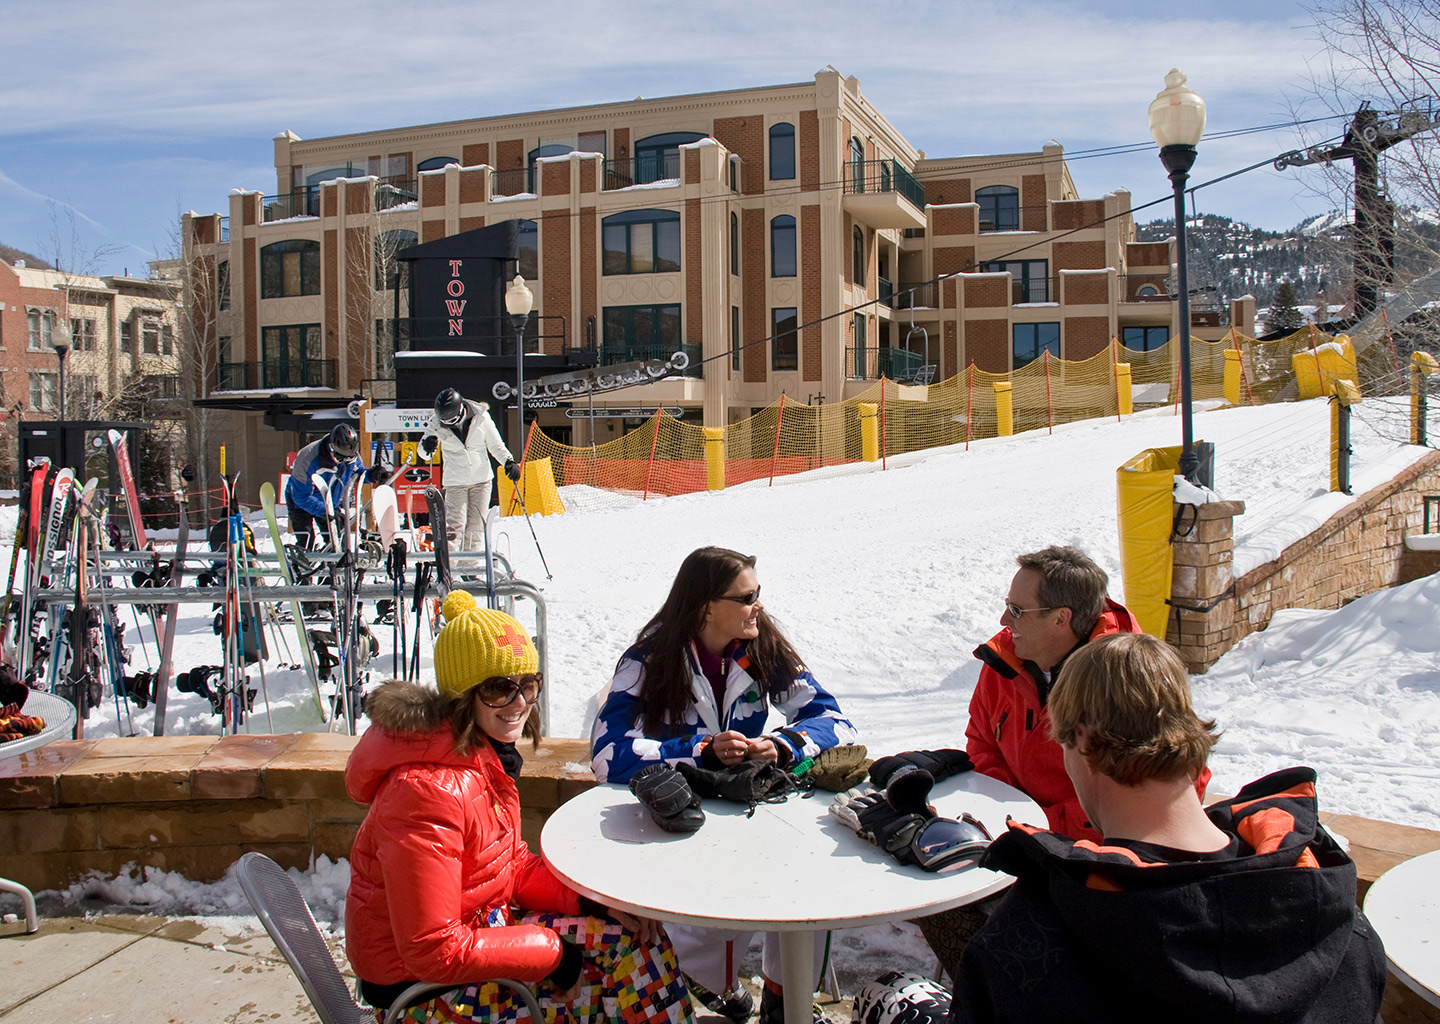 Skiers Taking a Lunch Break Outside of The Caledonian in Park City, Utah